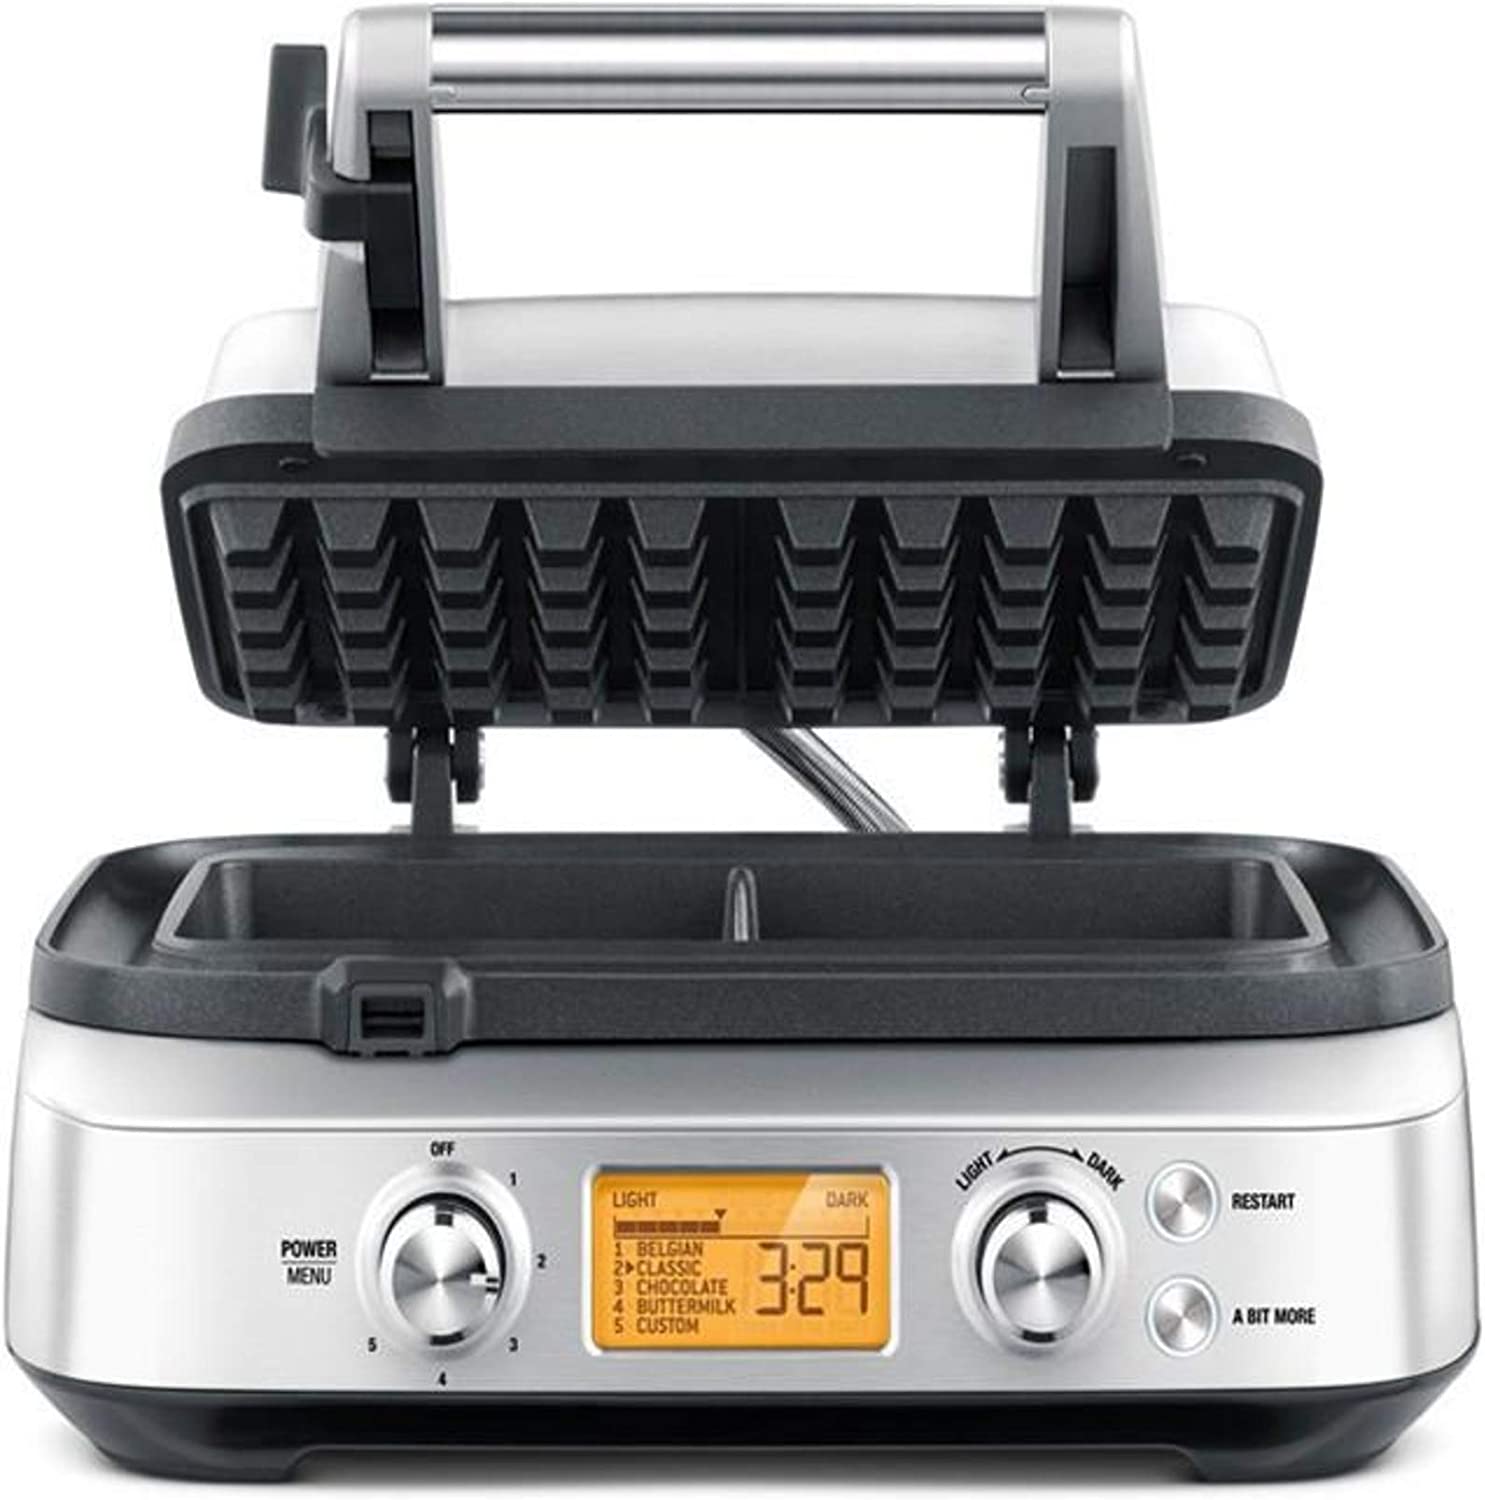 Say by Heston Blumenthal the Smart Waffle Iron, 2 Slice, 1000 Watts by Sage by Heston Blumenthal